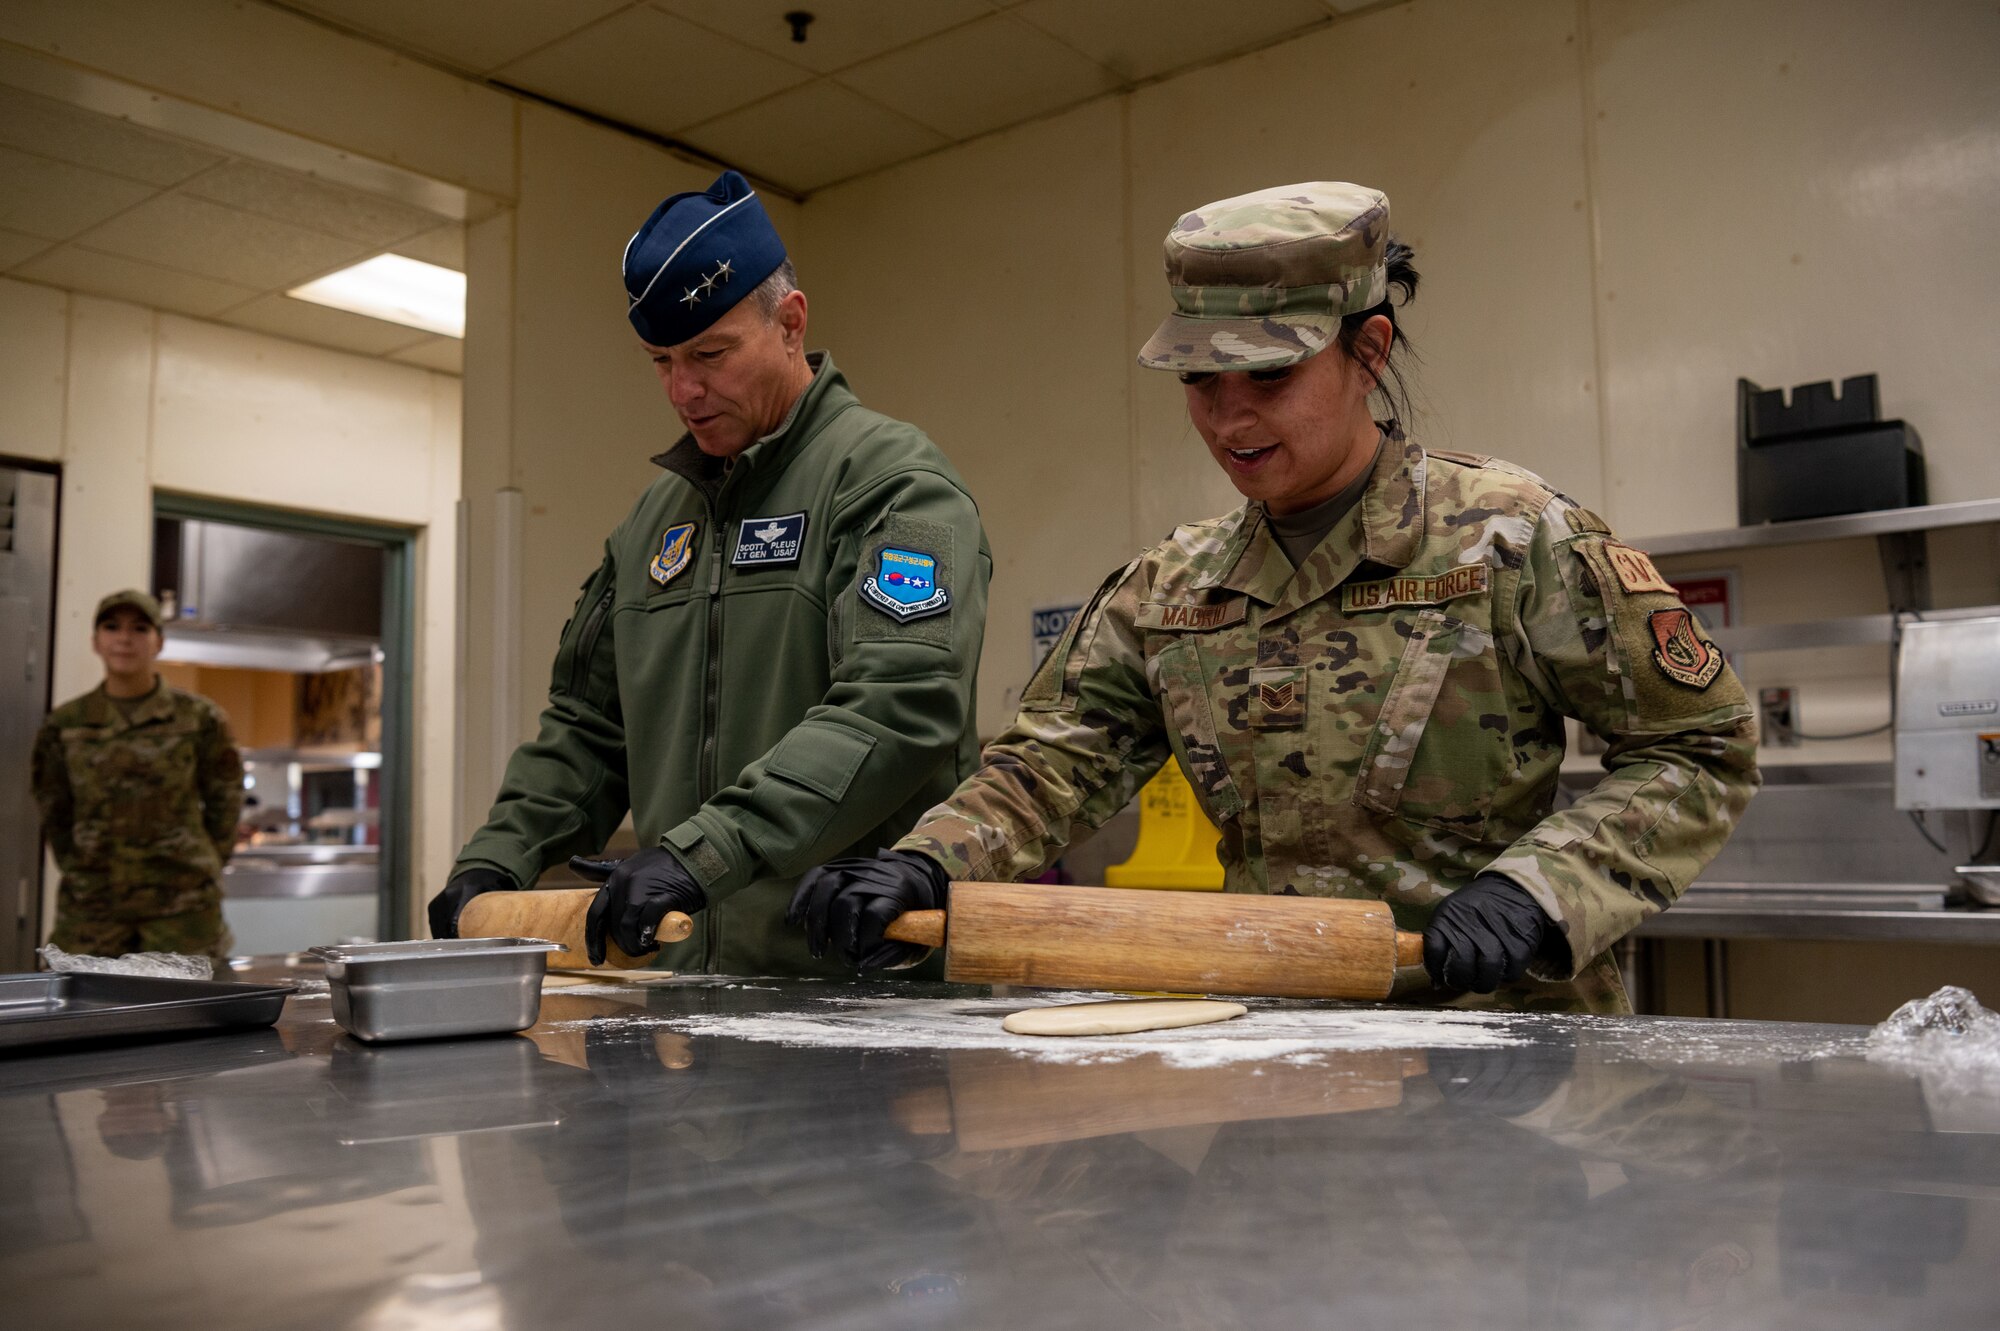 U.S. Air Force Lt. Gen. Scott Pleus, 7th Air Force commander, and Staff Sgt. Deandra Madrid, 51st Force Support Squadron’s Pacific House dining facility manager, roll out Naan dough at the Gingko Tree dining facility on Osan Air Base, Republic of Korea, Nov 30, 2022.